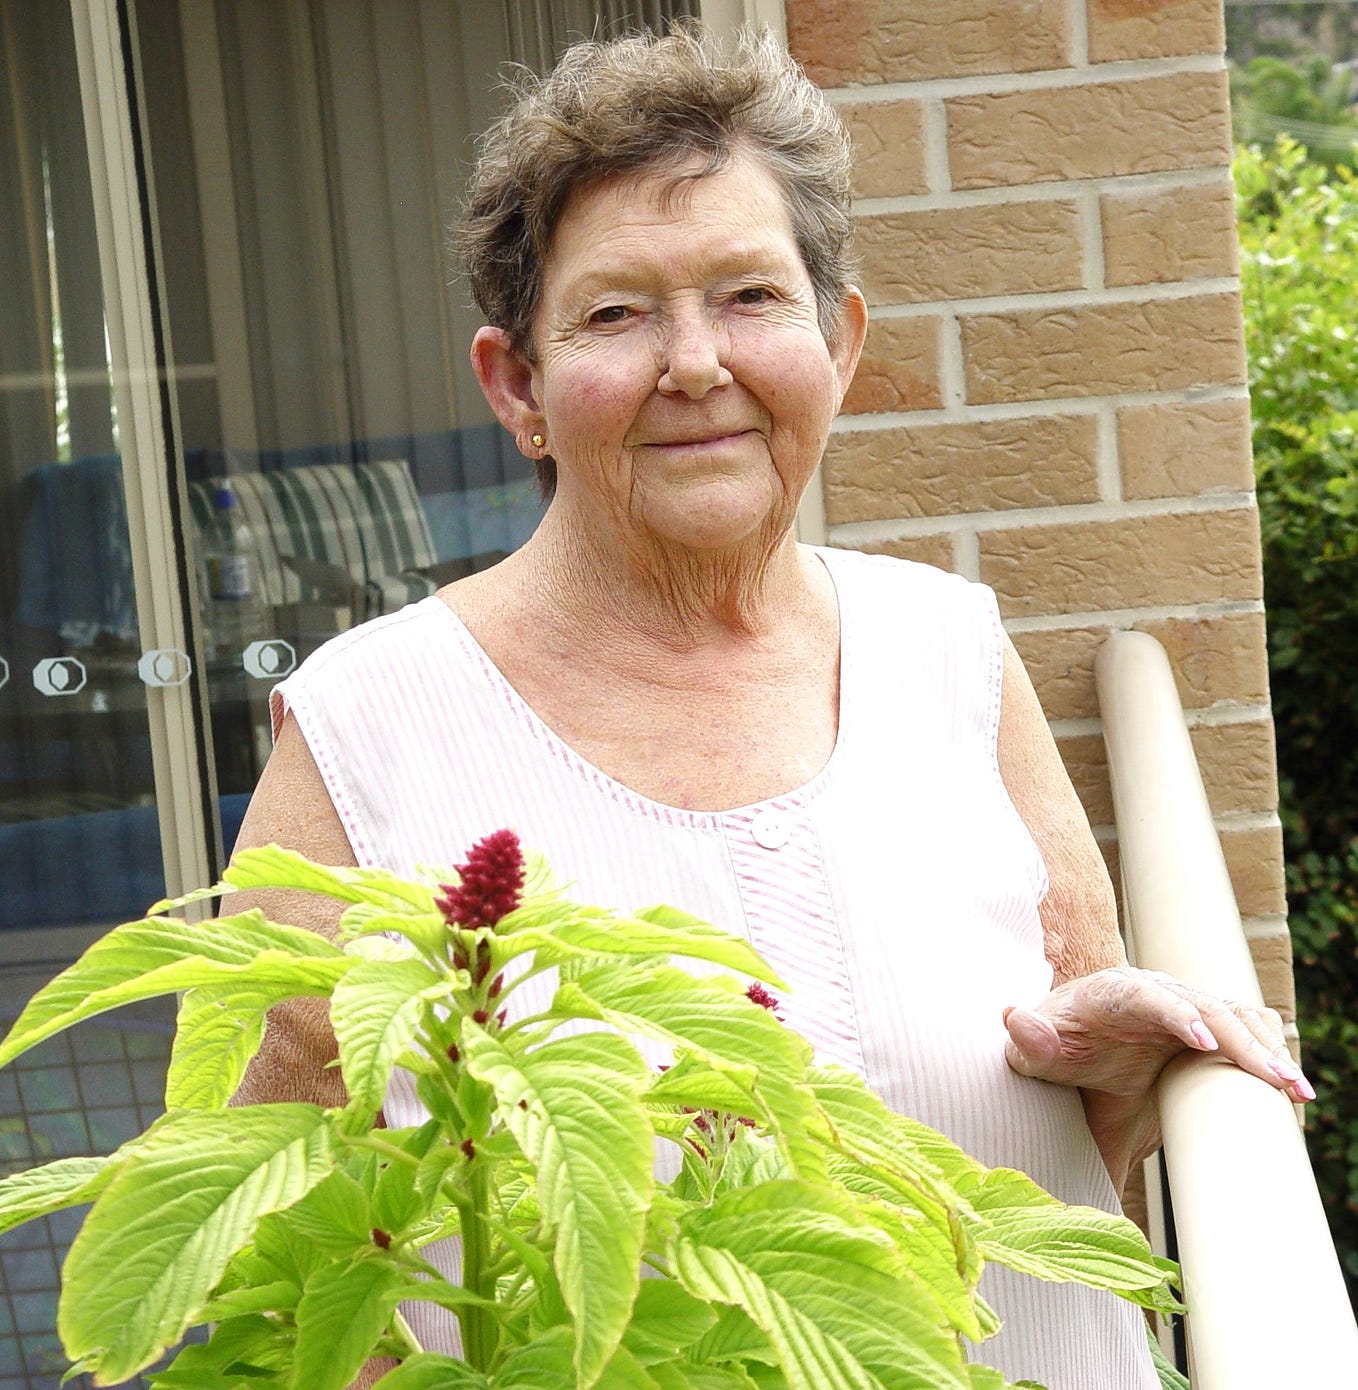 Elderly woman looking at the camera with a gentle smile on her face. One hand rests on a balcony railing and a plant with a red flower is in the forefront.